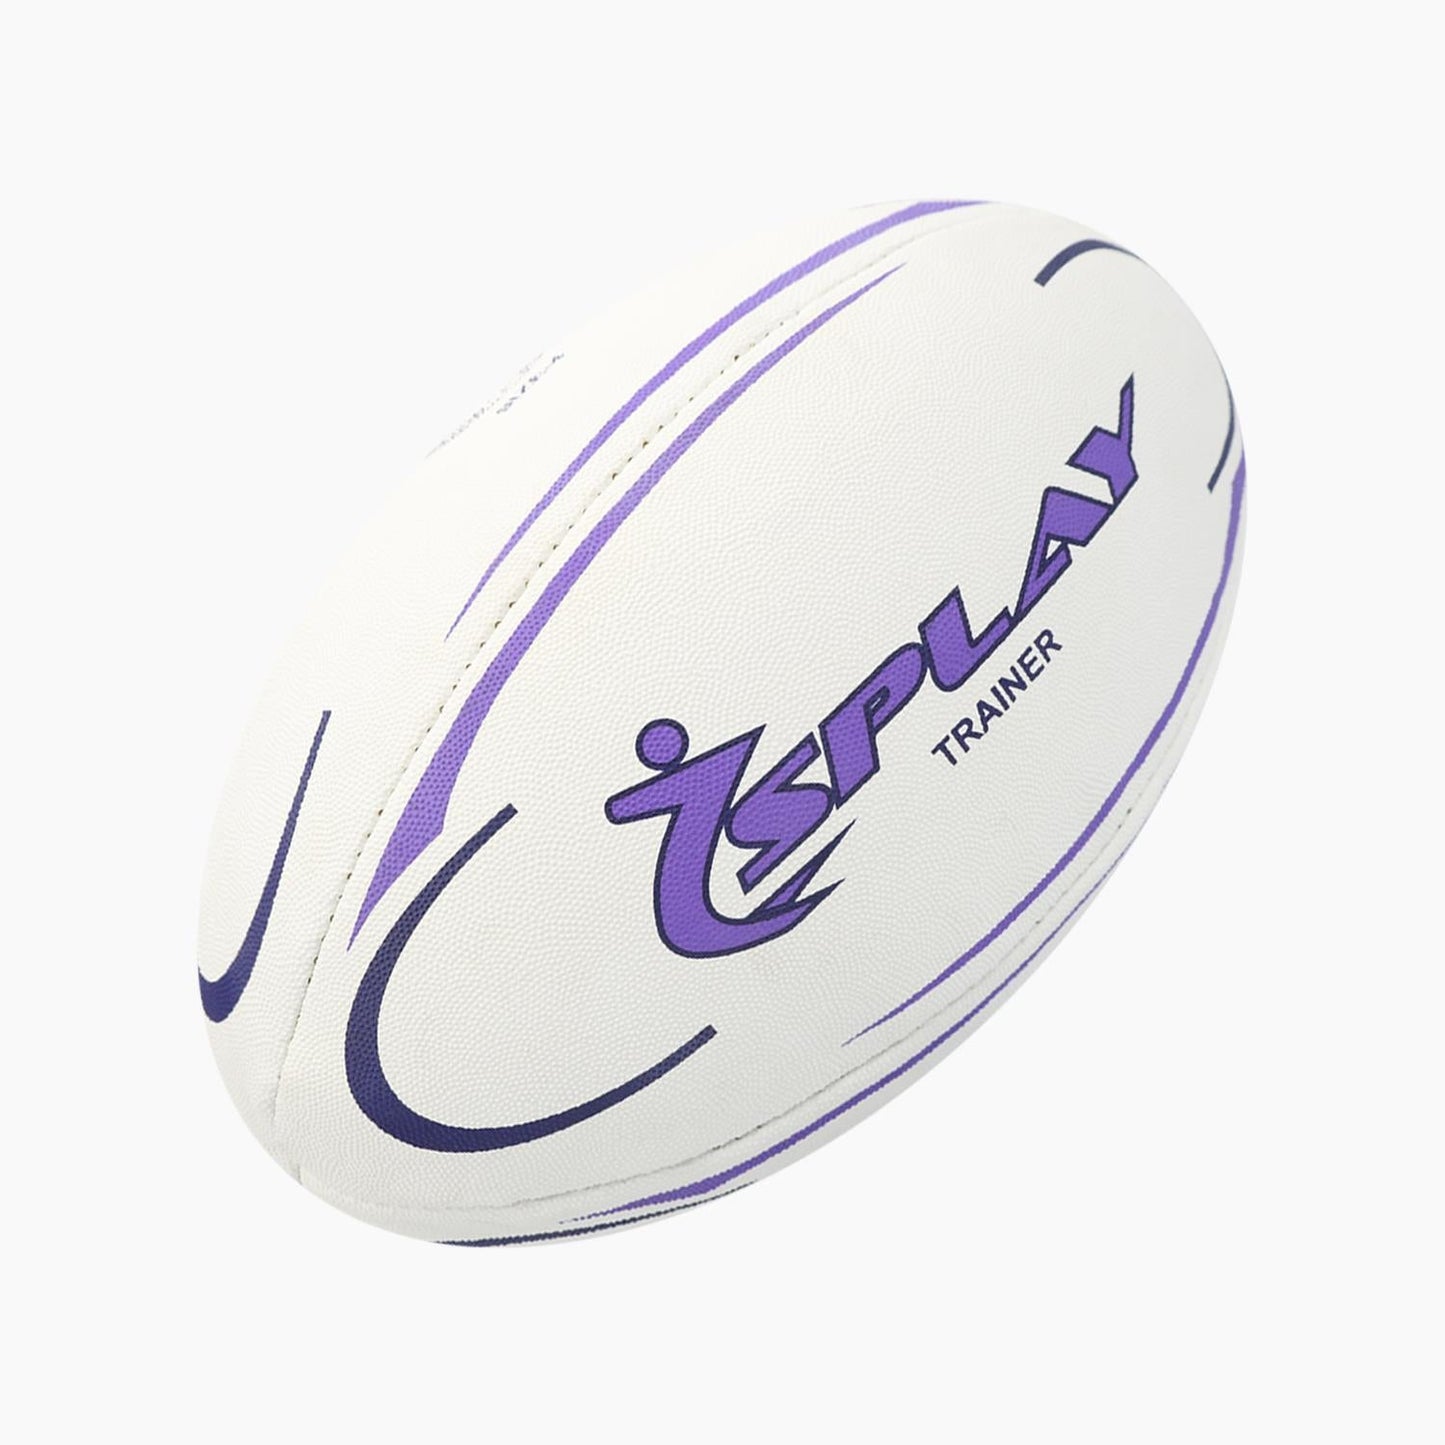 Buy Splay Trainer Rugby Ball-Rugby Ball-Splay (UK) Limited-Purple-4-Splay UK Online